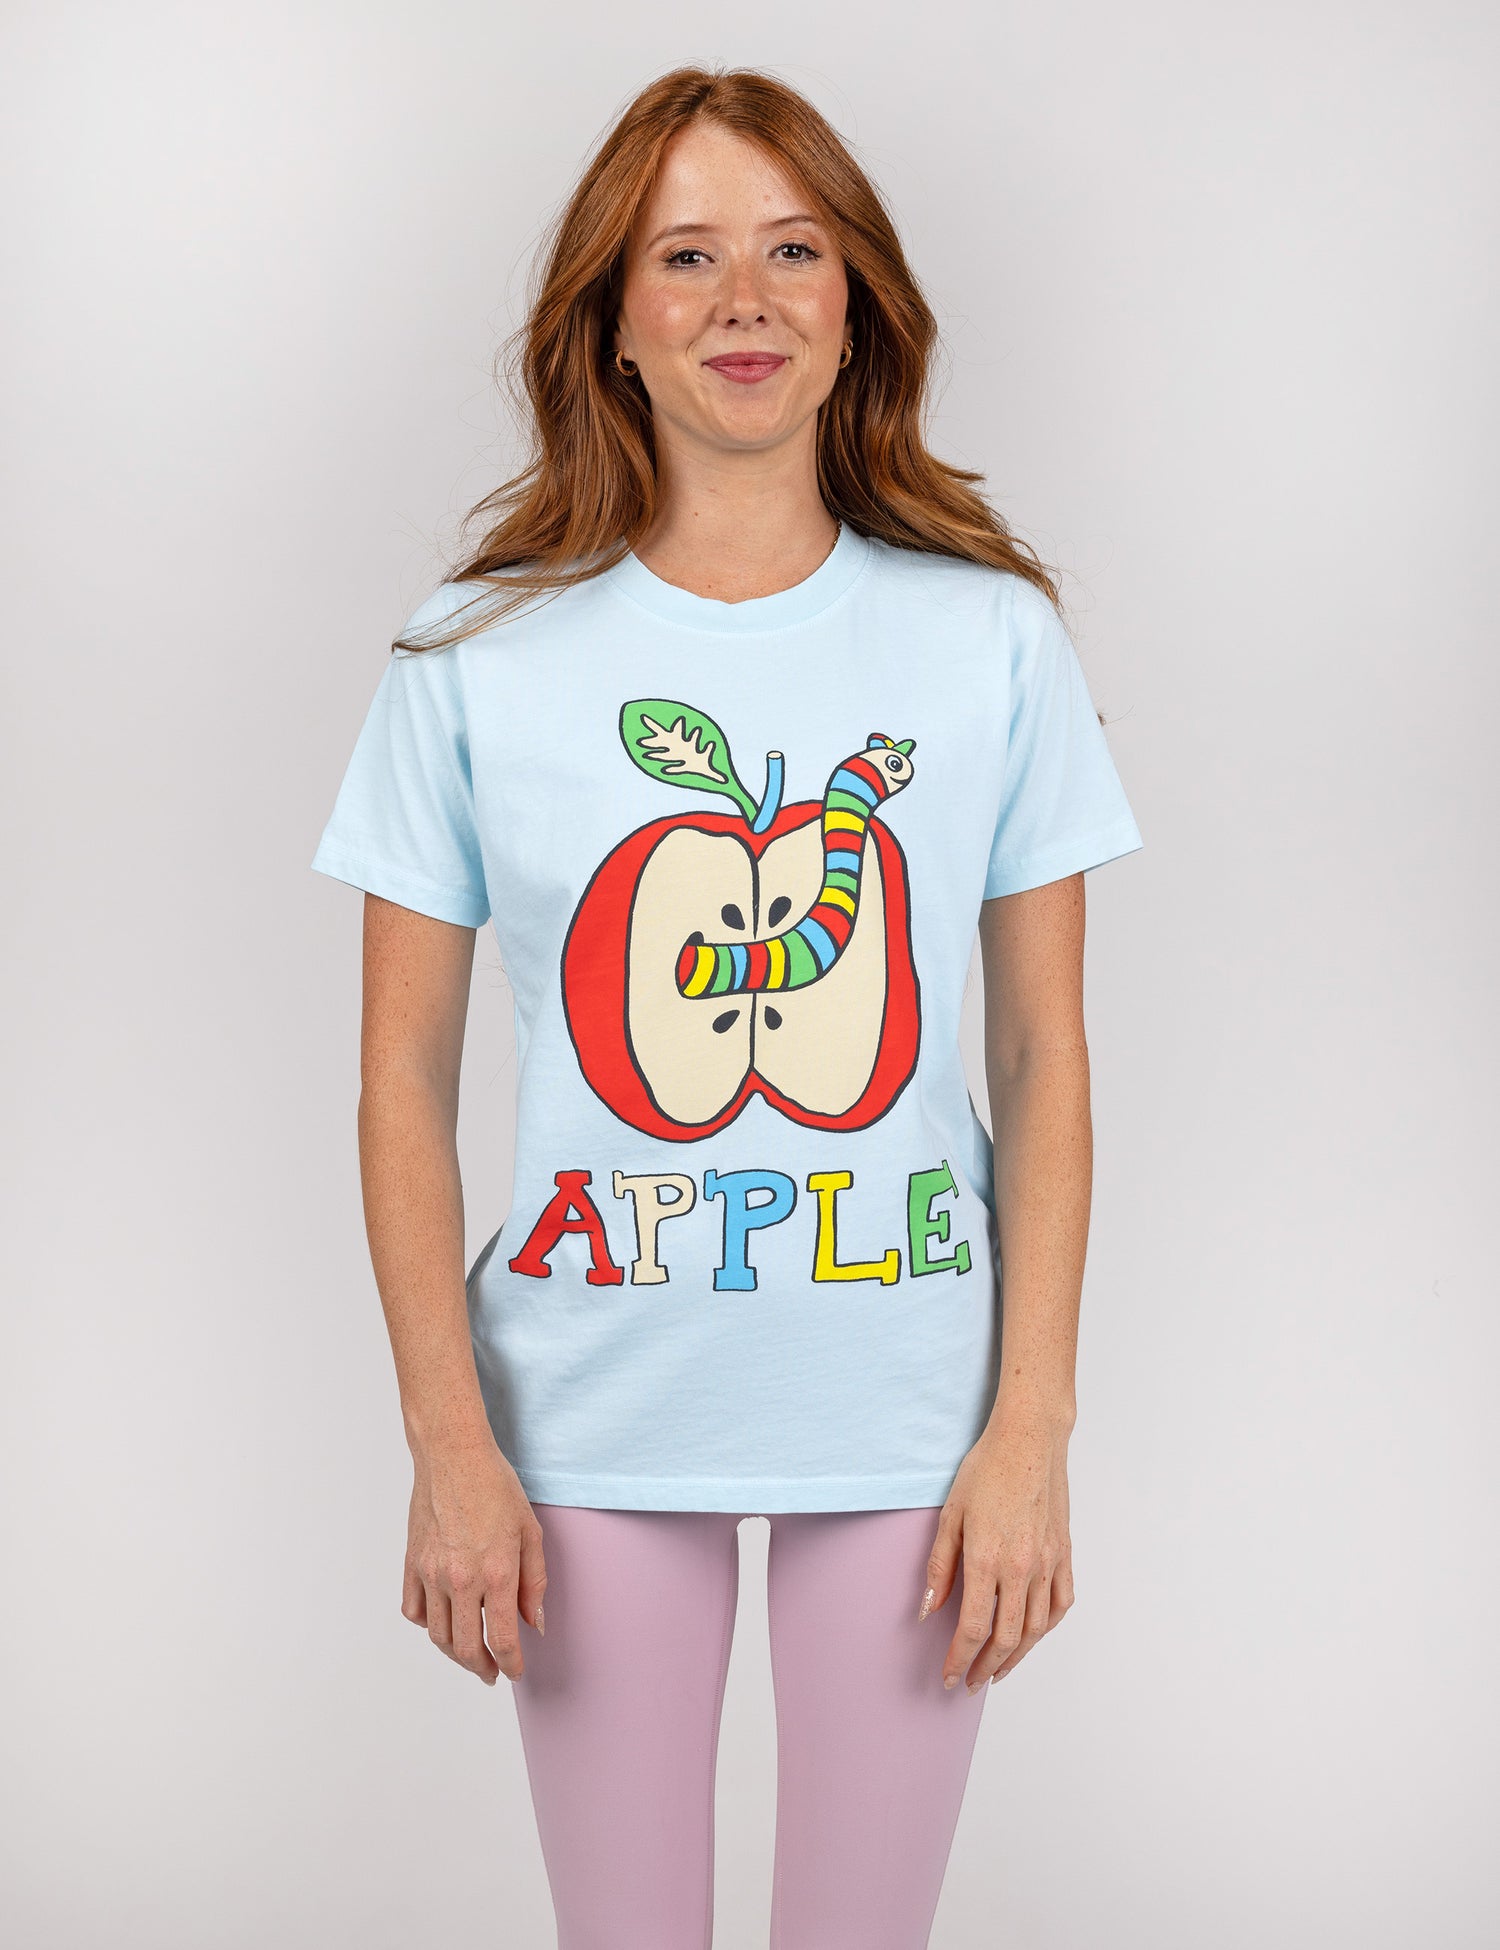 woman wearing light blue shirt with an apple and worm design in the center.